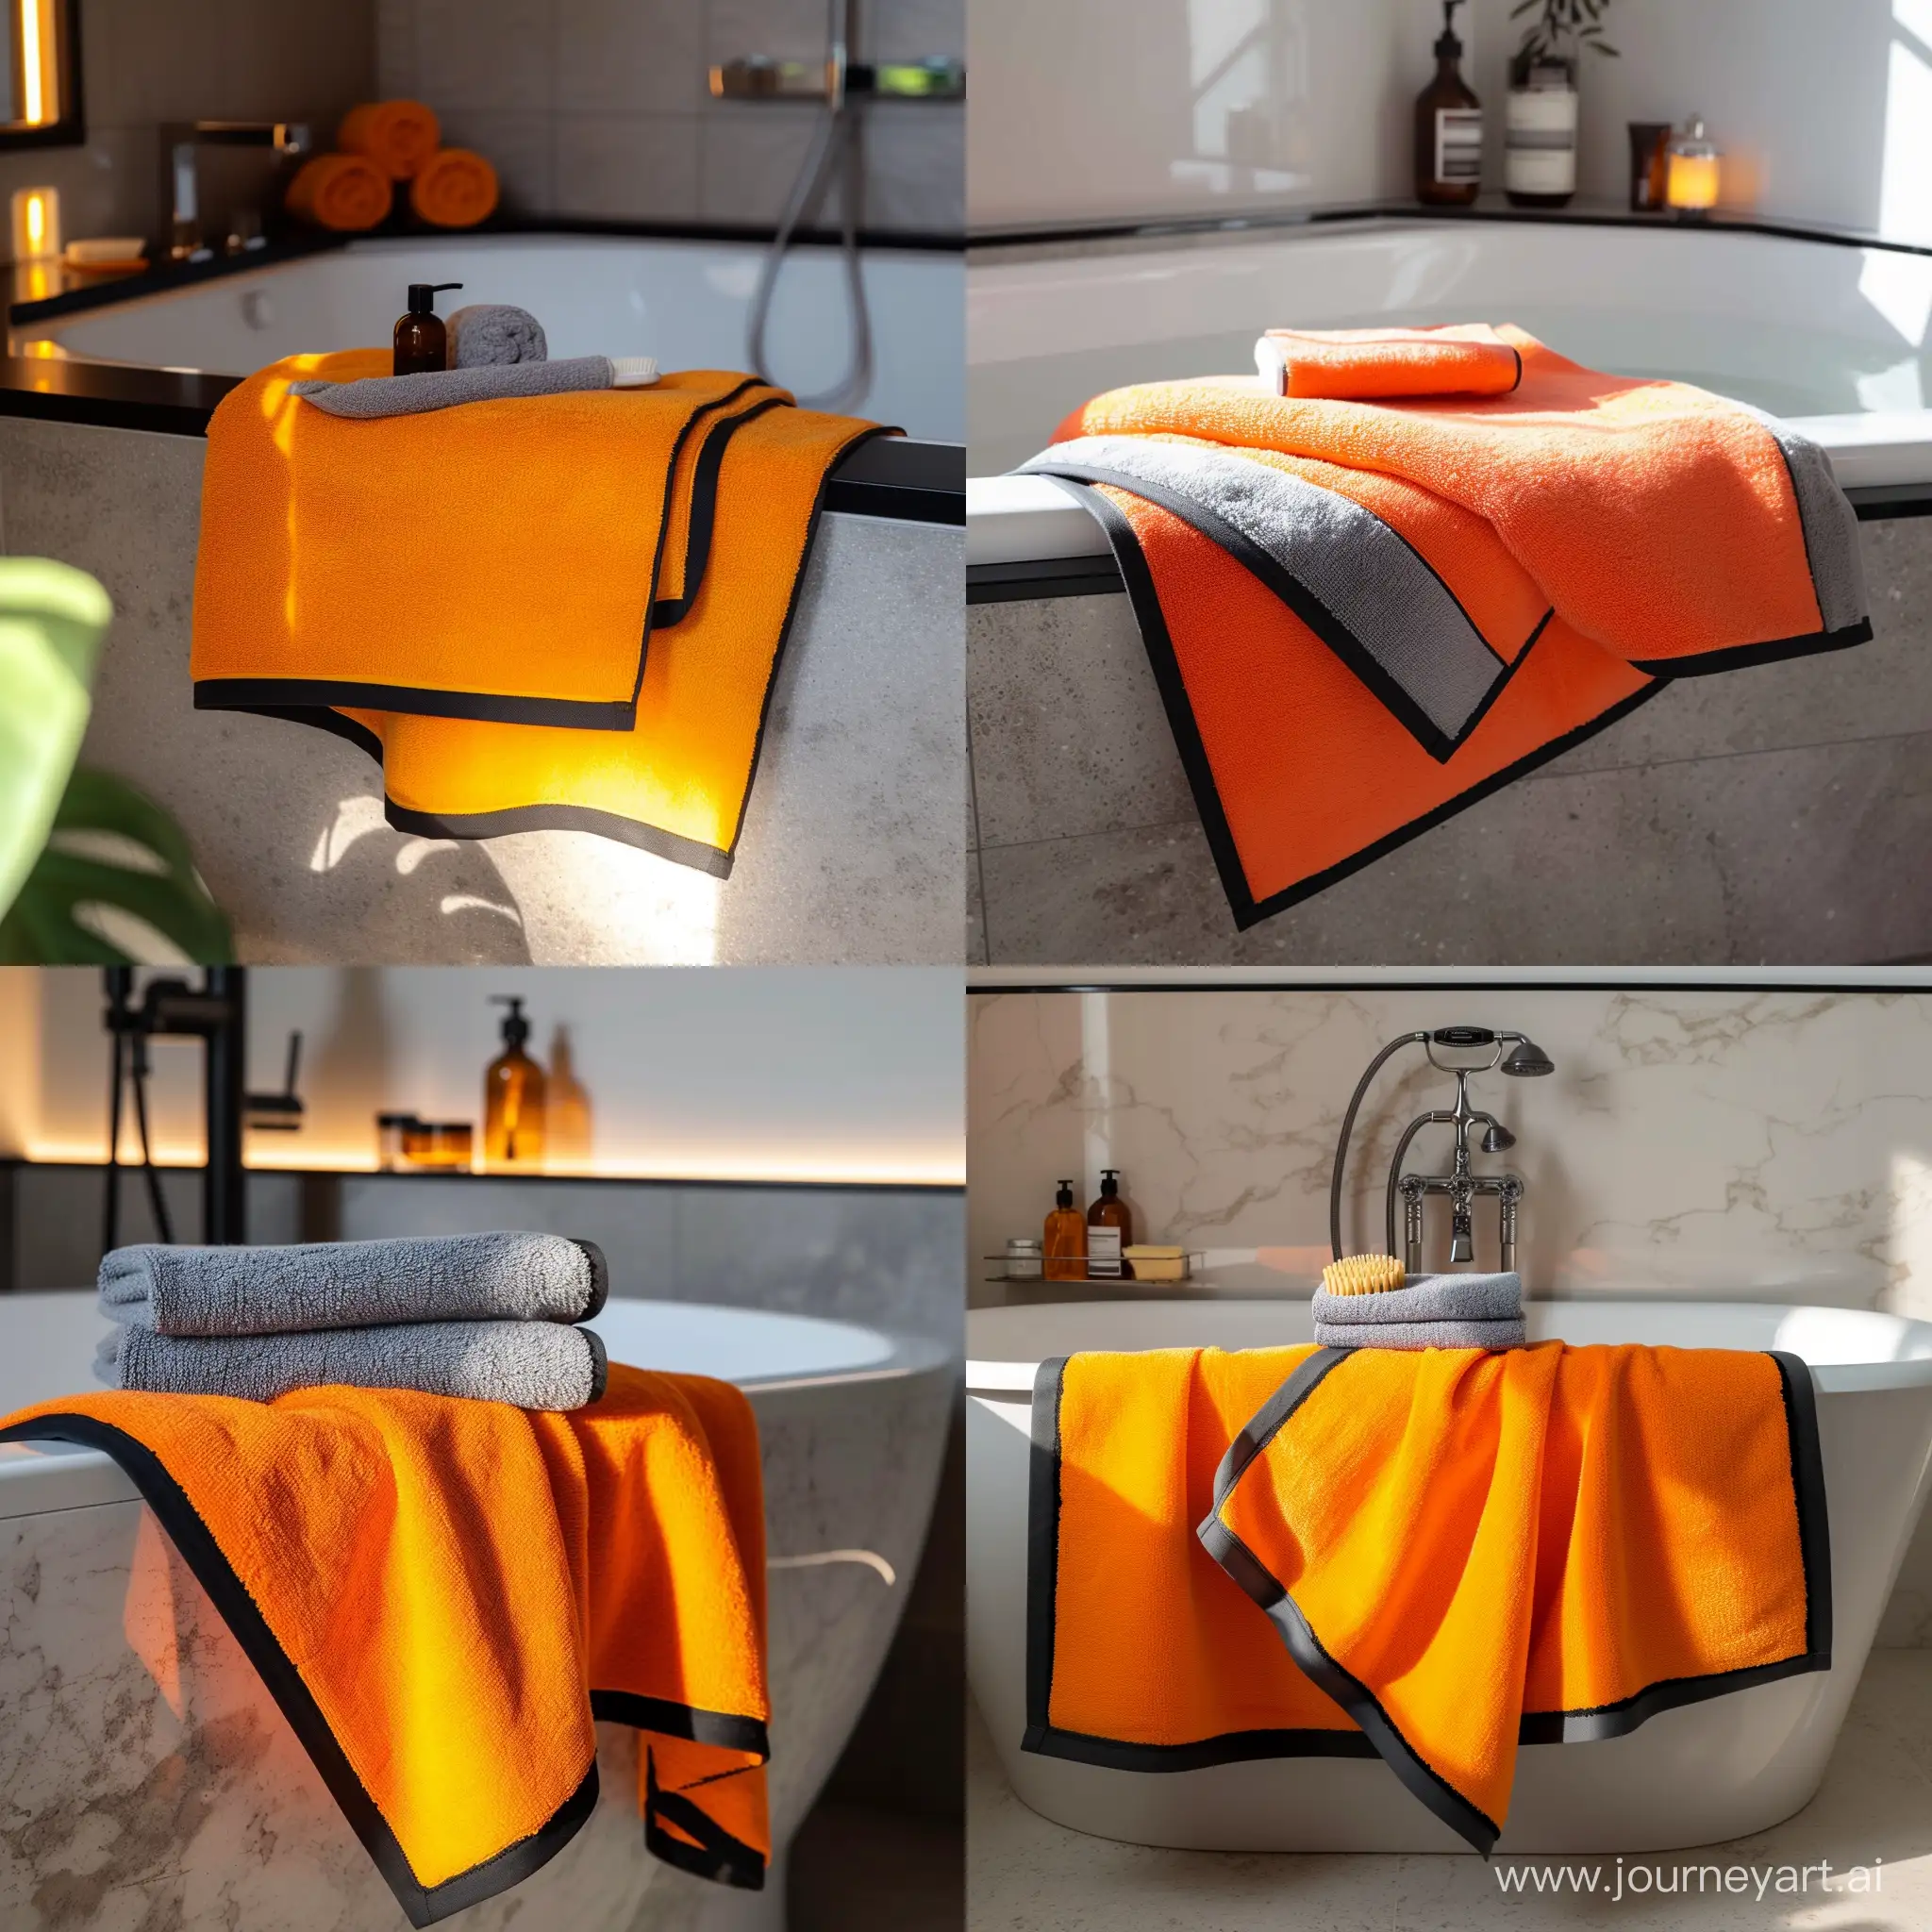 Luxurious-Gray-and-Orange-Towels-in-Stylish-Bathtub-with-Black-Edges